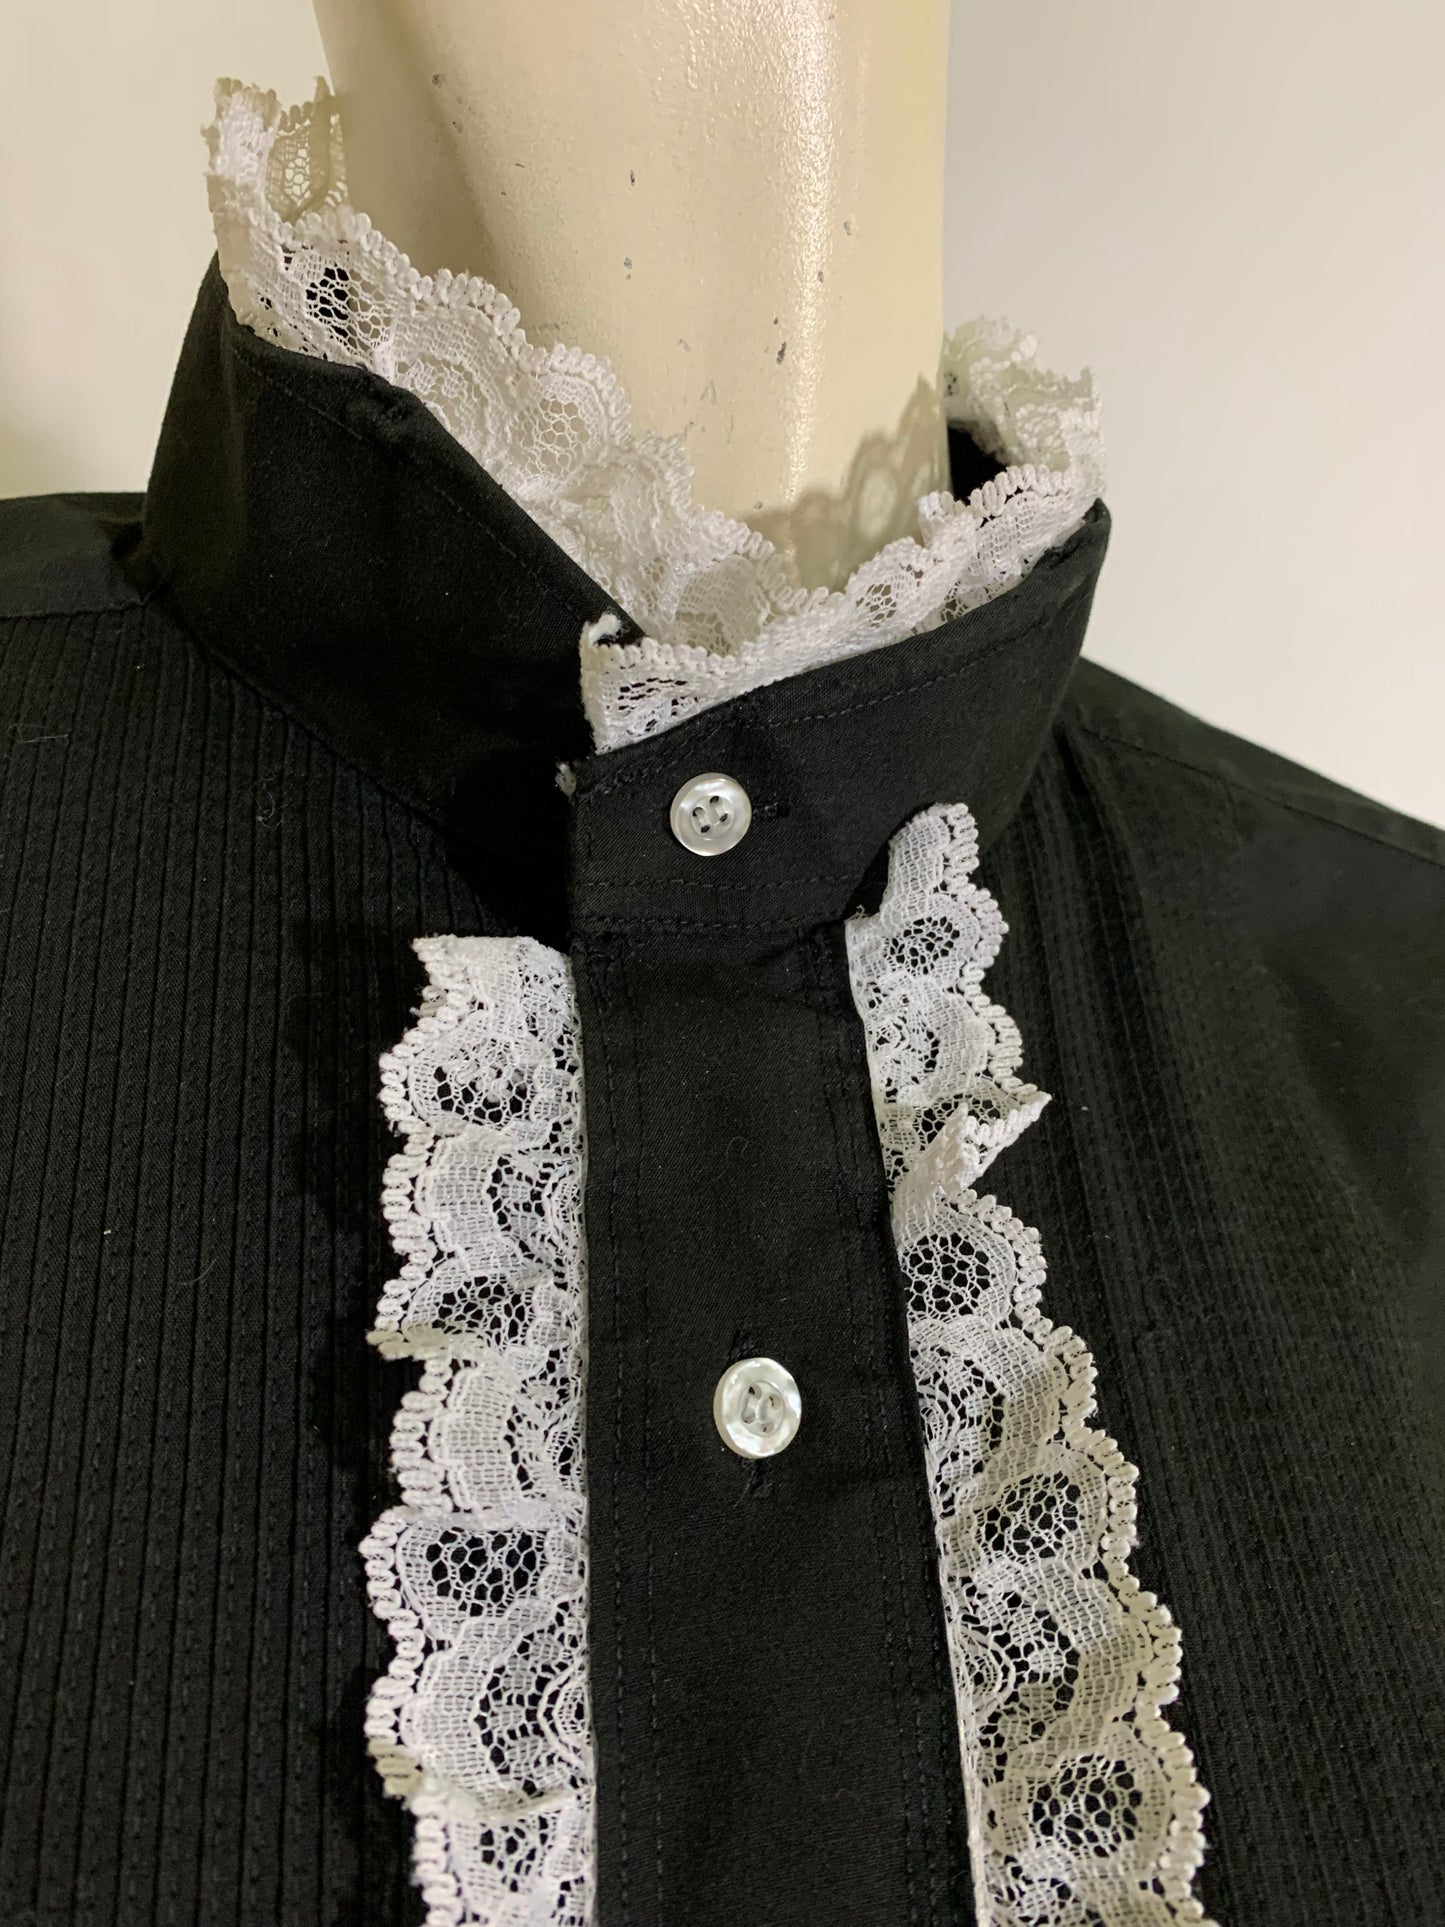 Black and White Lace Ruffled Front Shirt circa 1980s